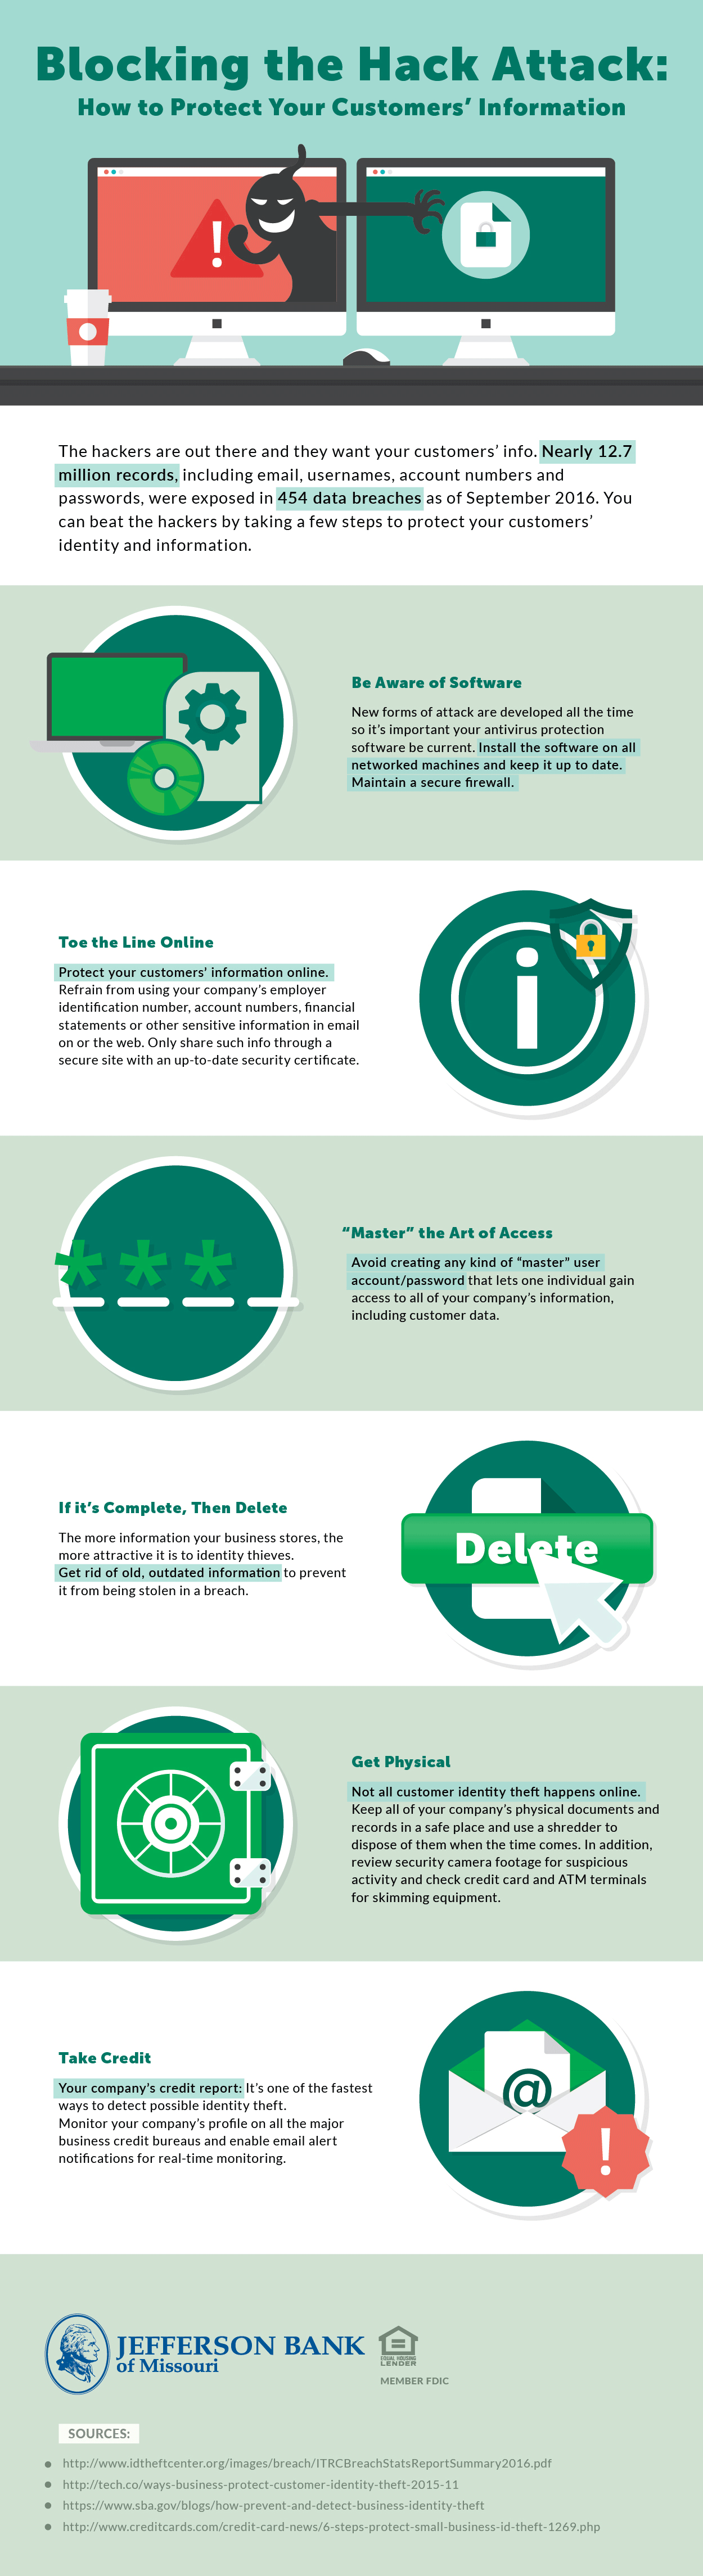 An infographic showing ways to prevent cyber thieves